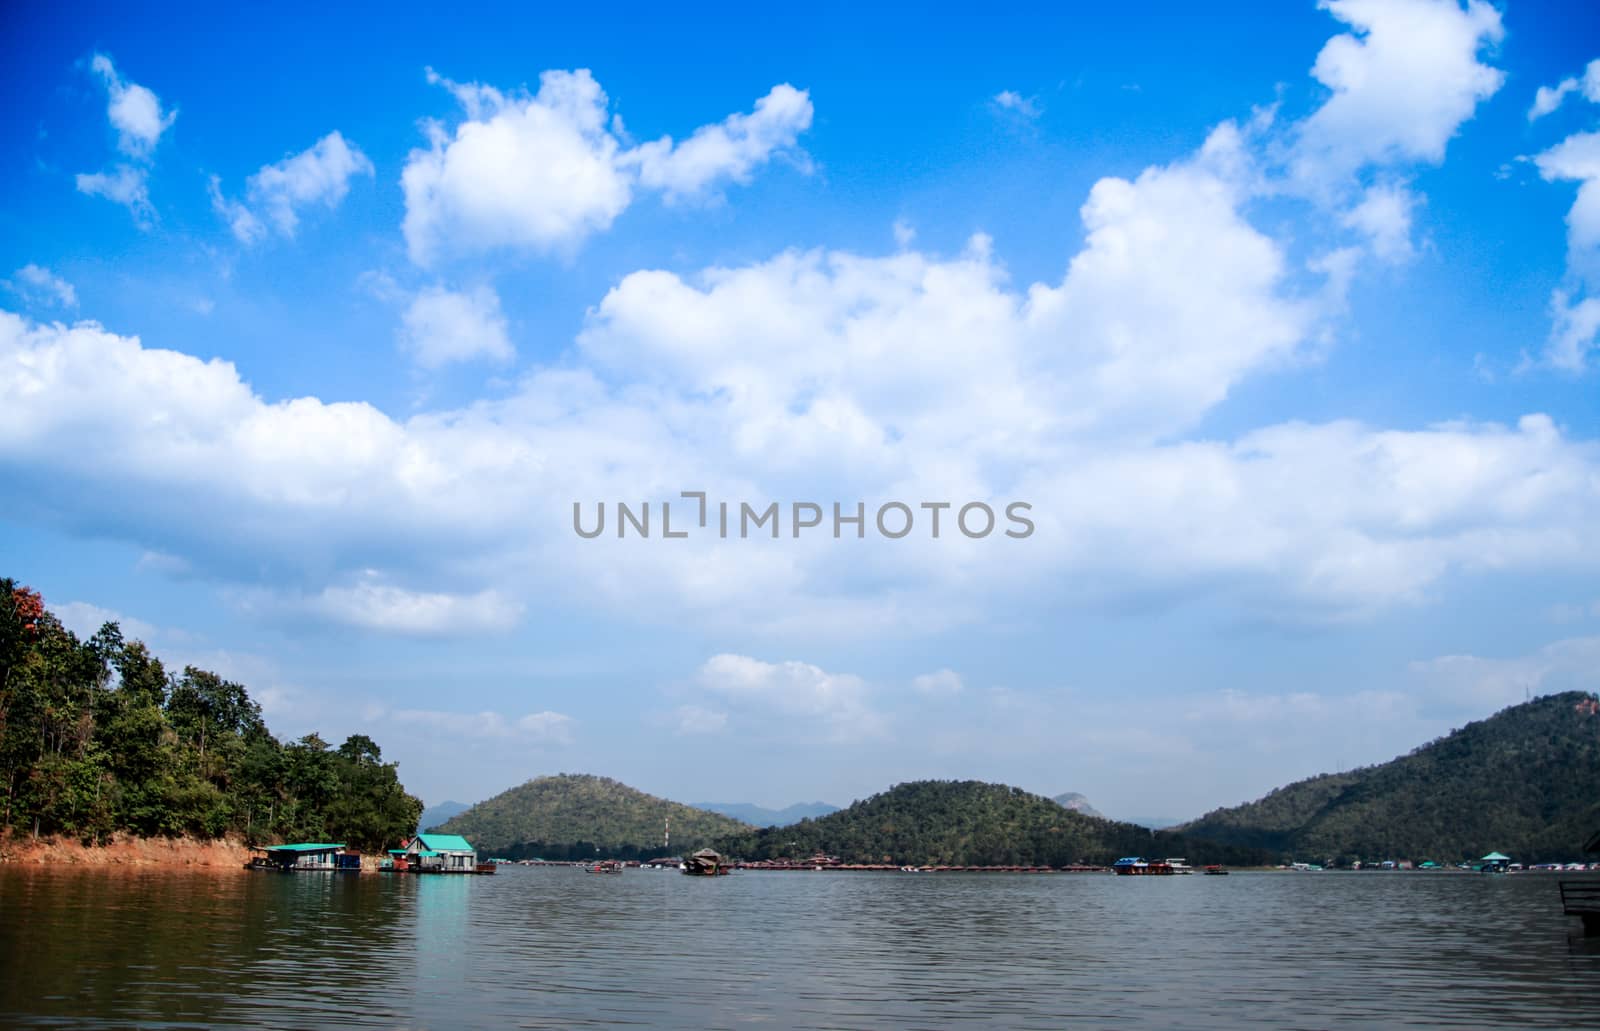 A beautiful scenery With a river in front of the mountain There were sky and clouds on the mountains and trees on the mountains. by anlomaja